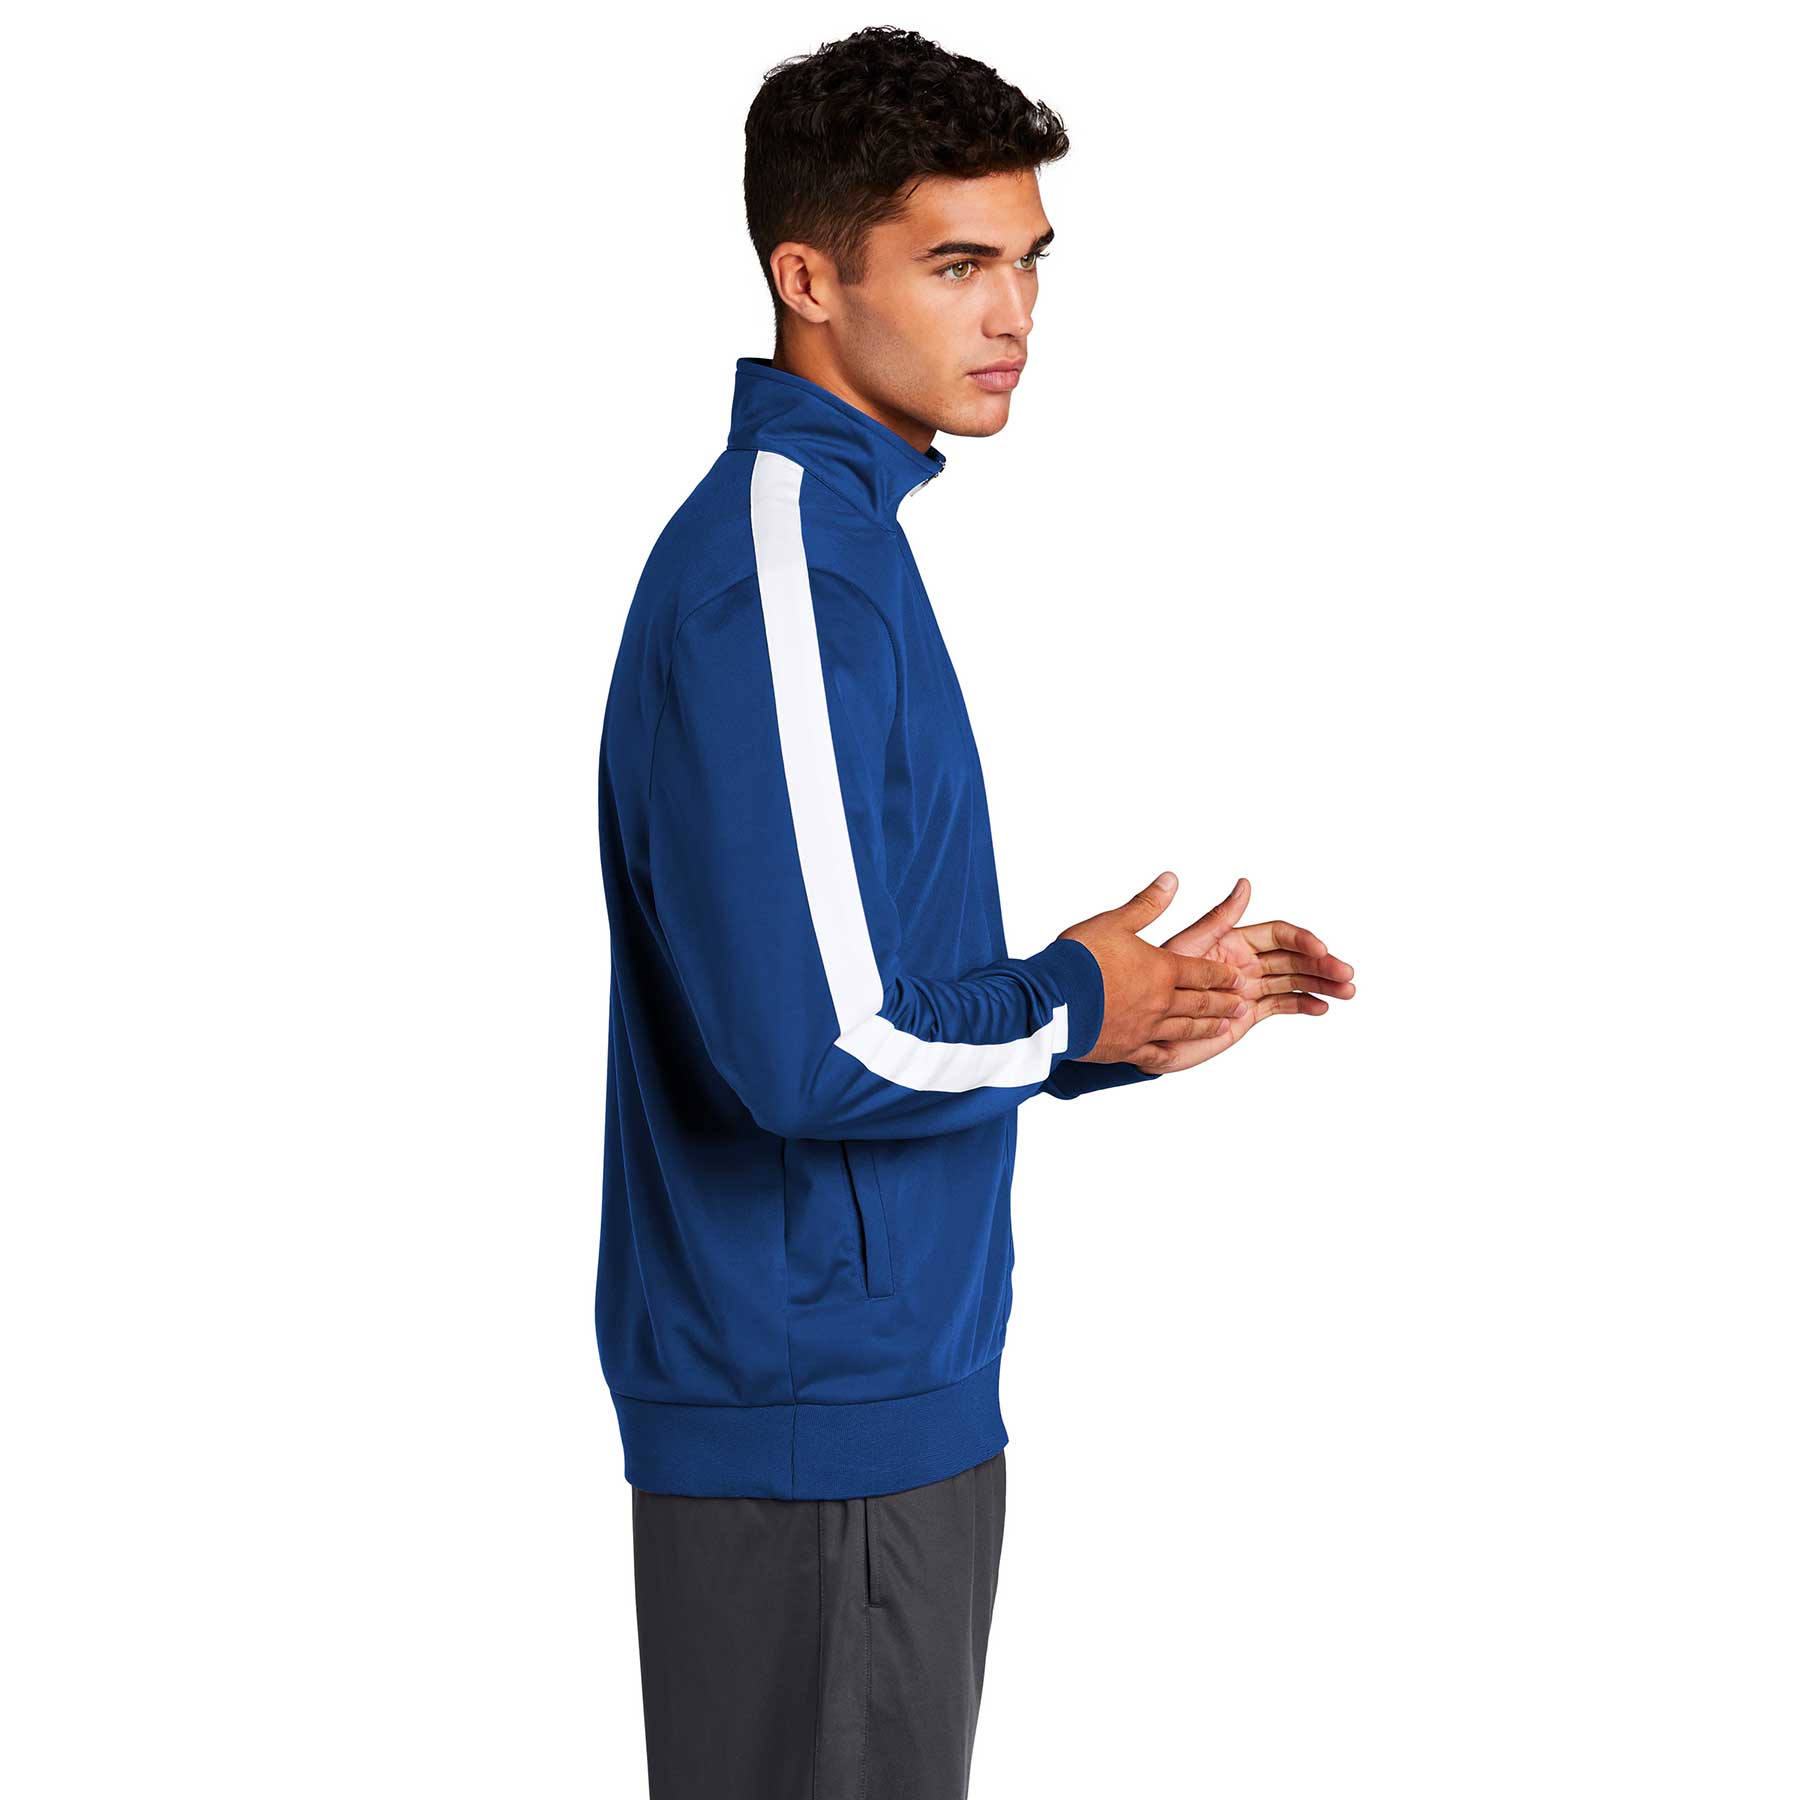 MIRA MESA SOCCER MEN'S PLAYER TRACK JACKET - EMBROIDERED